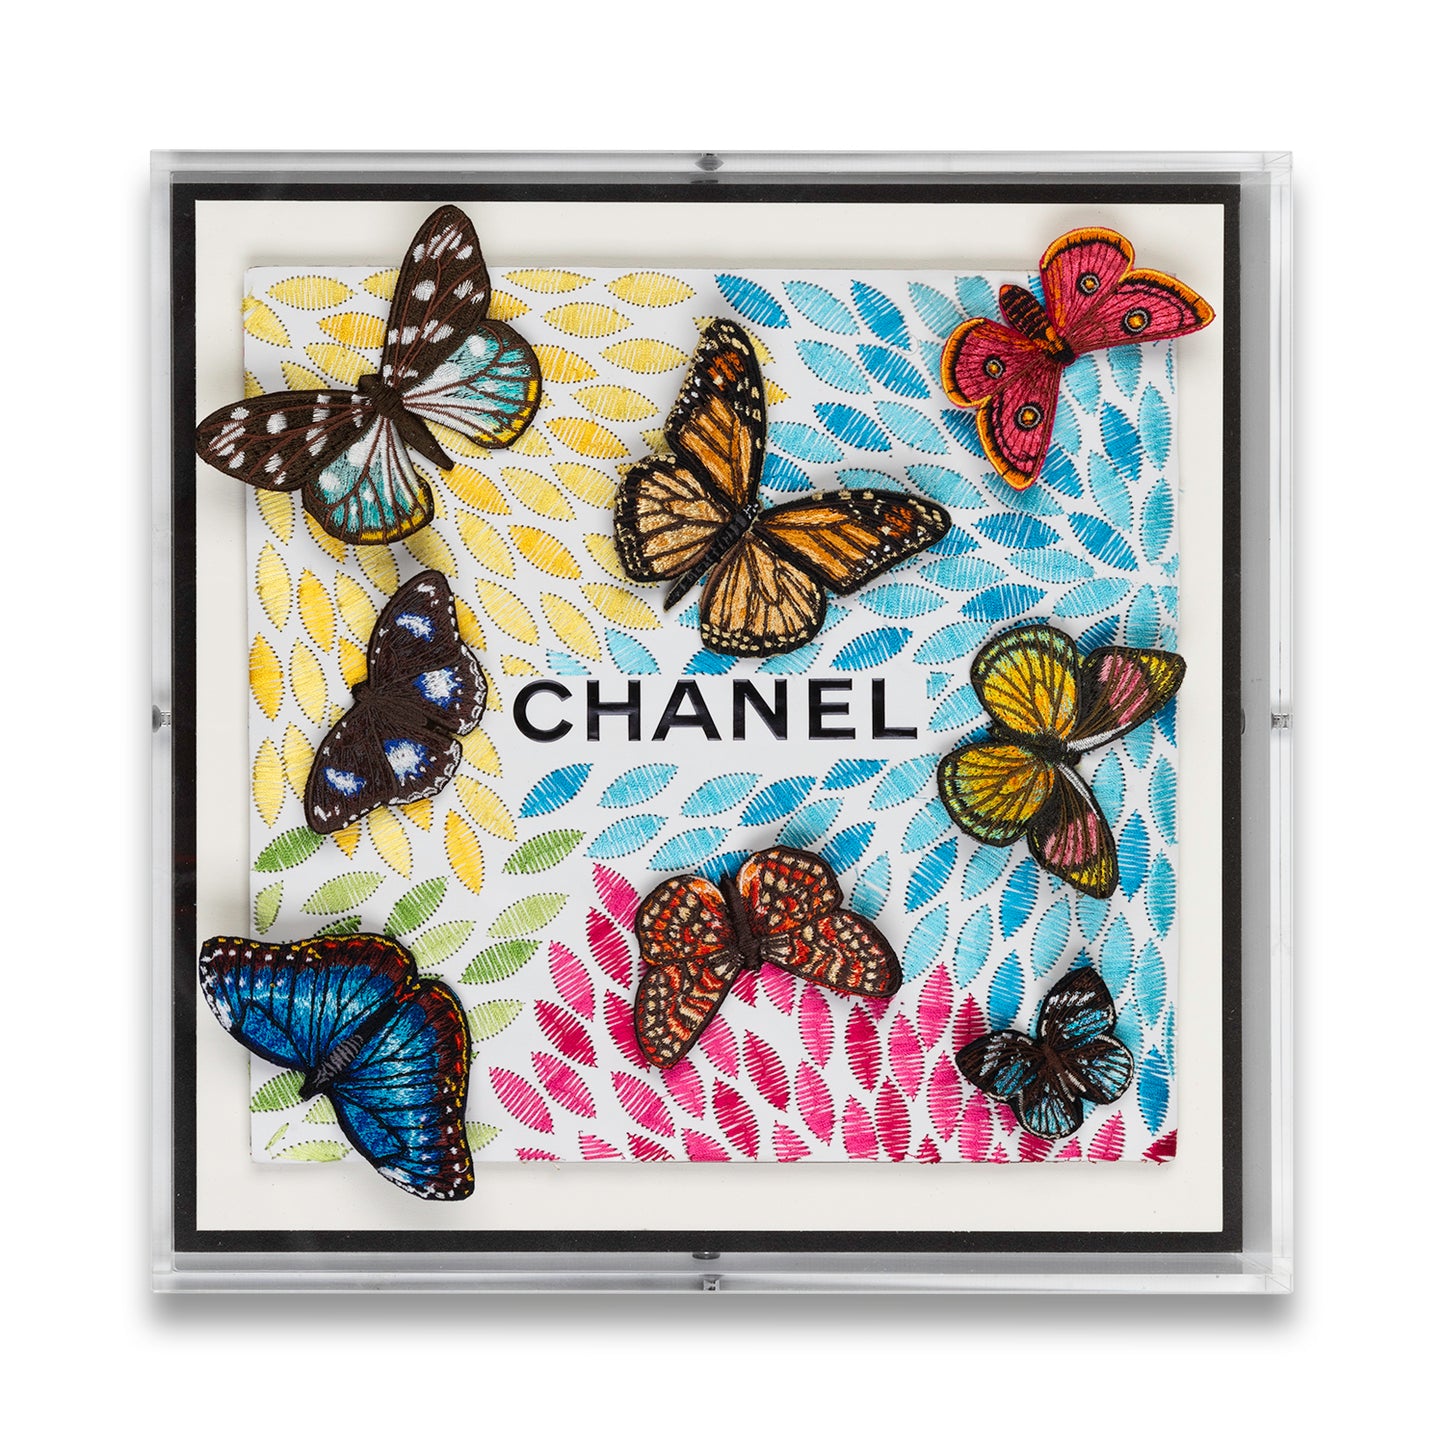 Chanel Petals with Butterflies by Stephen Wilson 12x12x2"